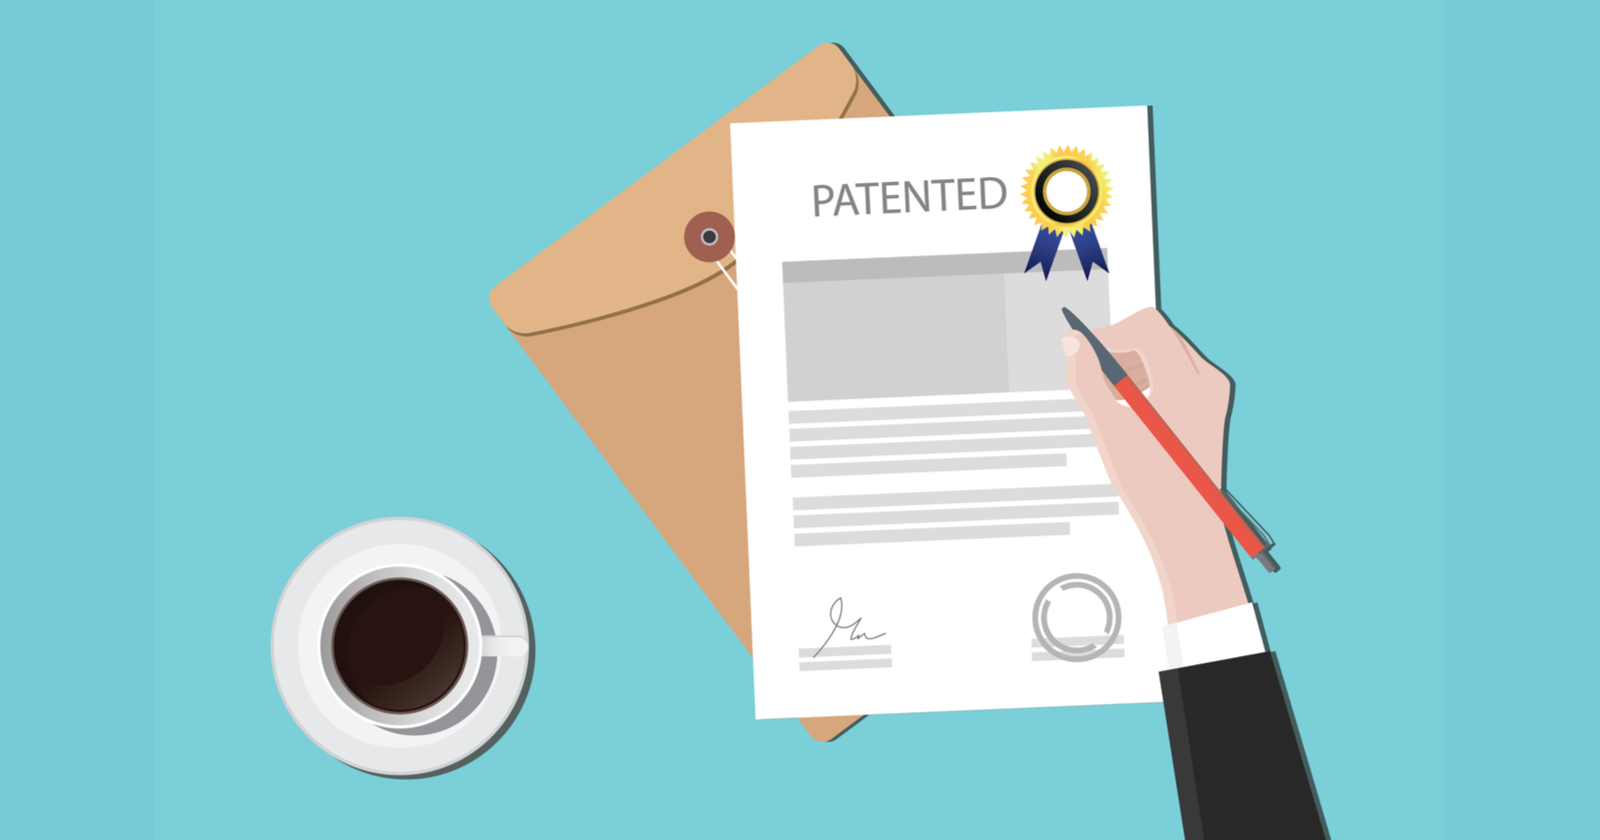 Google Patents- Exploring the Role of Content Groups & Search Intent in SEO